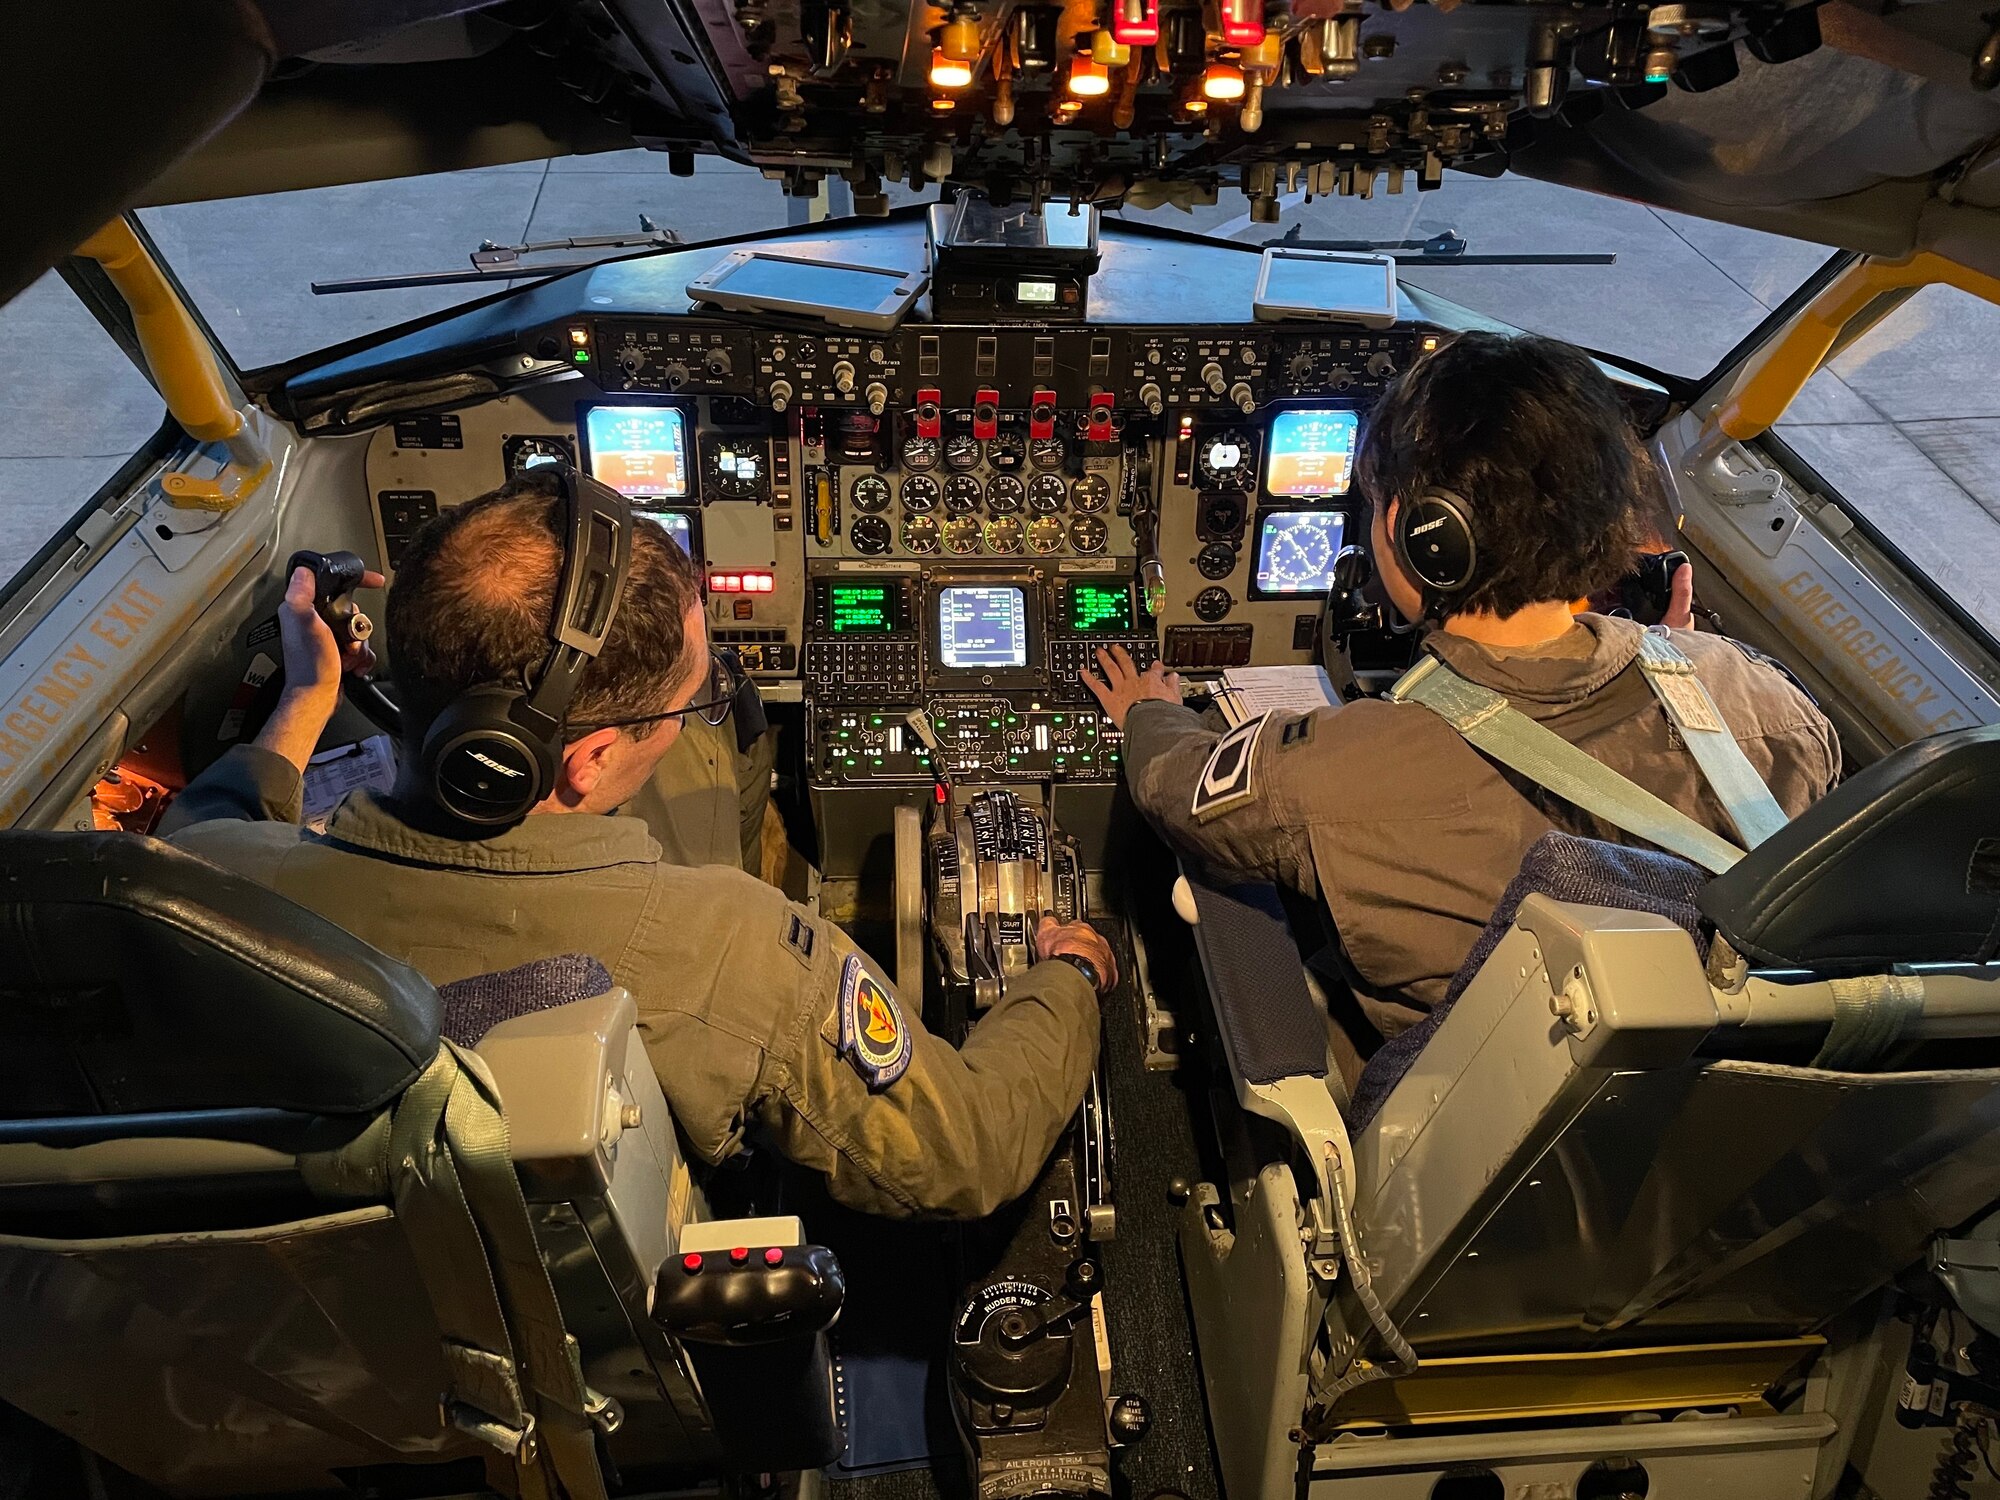 U.S. Air Force Capt. Joseph Tomassi, left, 351st Air Refueling Squadron pilot, and Capt. Katharine Kopinski, 351st ARS pilot, perform preflight checks on a KC-135 Stratotanker aircraft before a refueling mission during exercise Castle Forge at Royal Air Force Mildenhall, England, Nov. 1, 2021. The U.S. and Europe are mutually committed to facing emerging malignant forces and evolving strategic challenges. Alongside F-15 operations in the Black Sea Region, Castle Forge encompasses the USAFE MAJCOM-wide Agile Combat Employment Initial Operating Capability capstone event. Both Castle Forge’s components will better enable forces to quickly disperse and continue to deliver air power from locations with varying levels of capacity and support, ensuring Airmen are always ready to respond to potential threats. (U.S. Air Force photo by Senior Airman Joseph Barron)